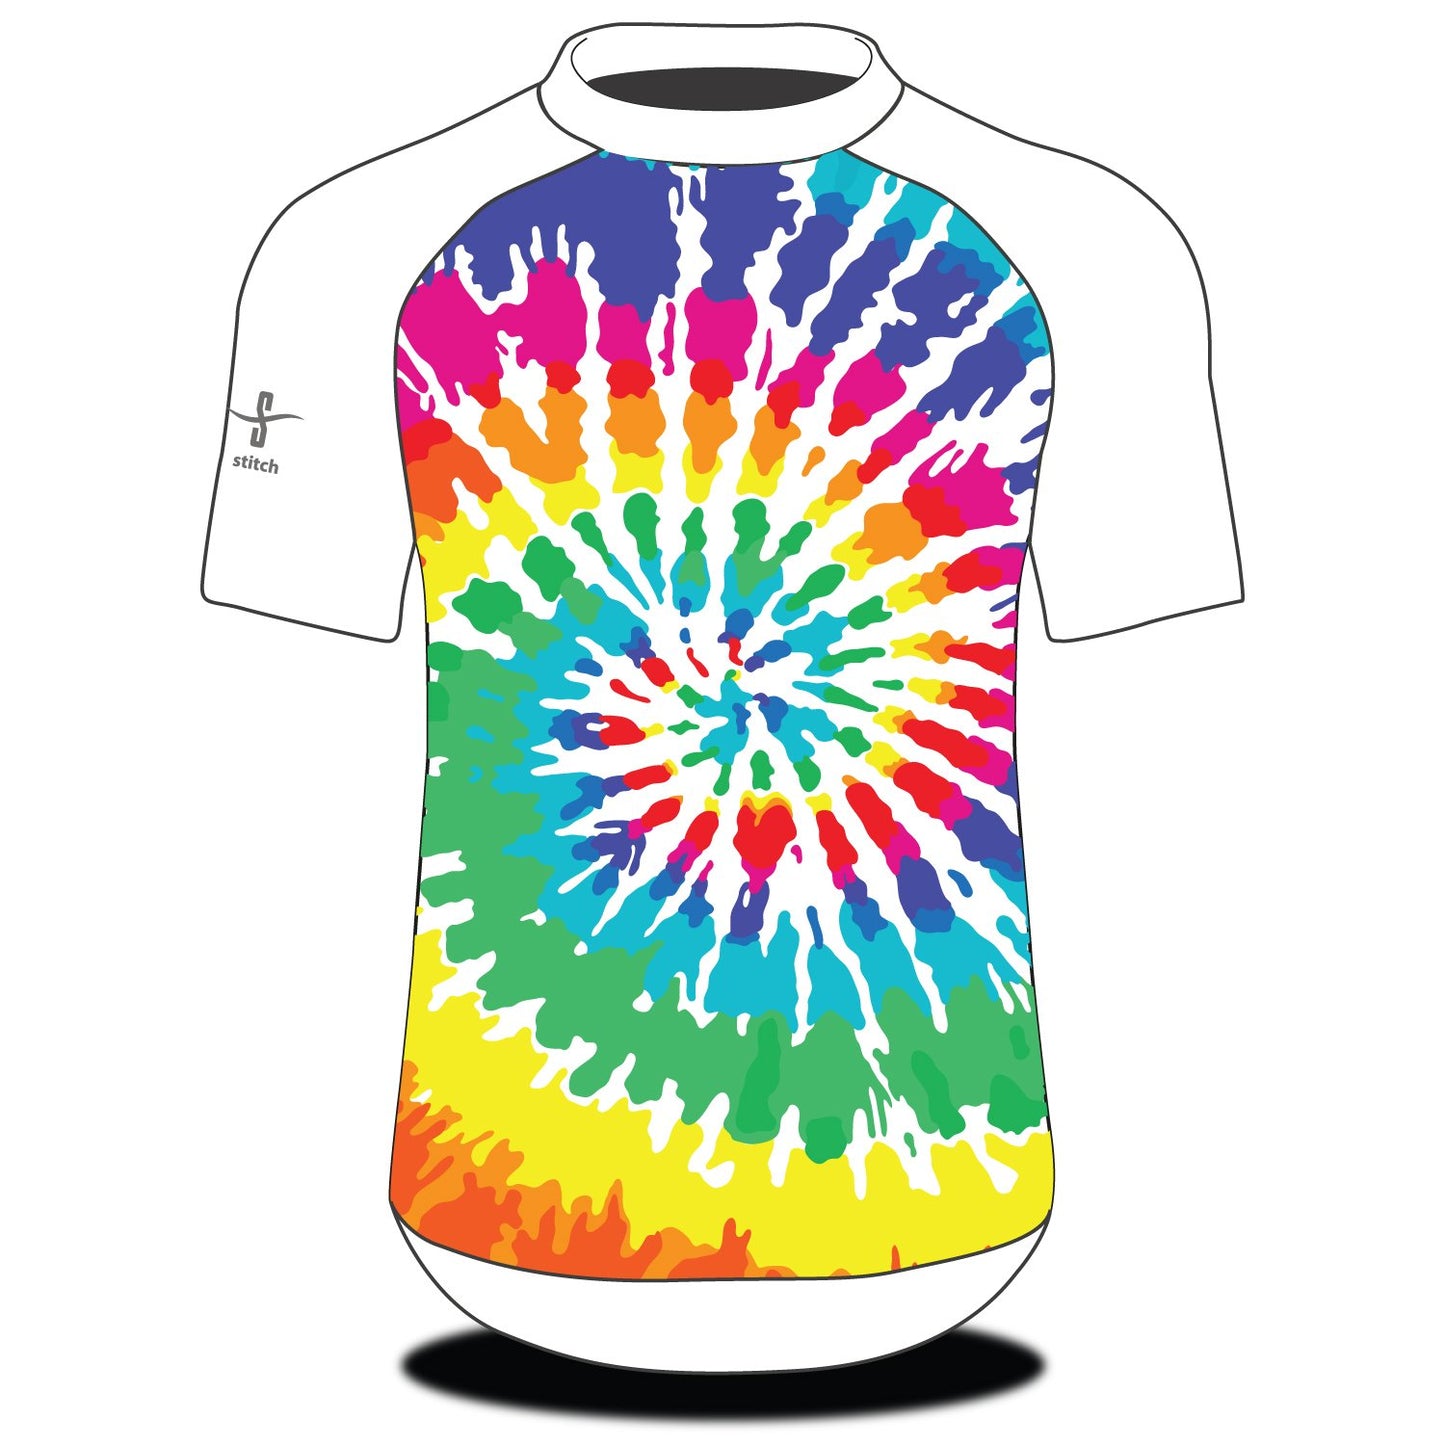 Stitch Rowing Tech Top Sublimated Short Sleeve TieDye